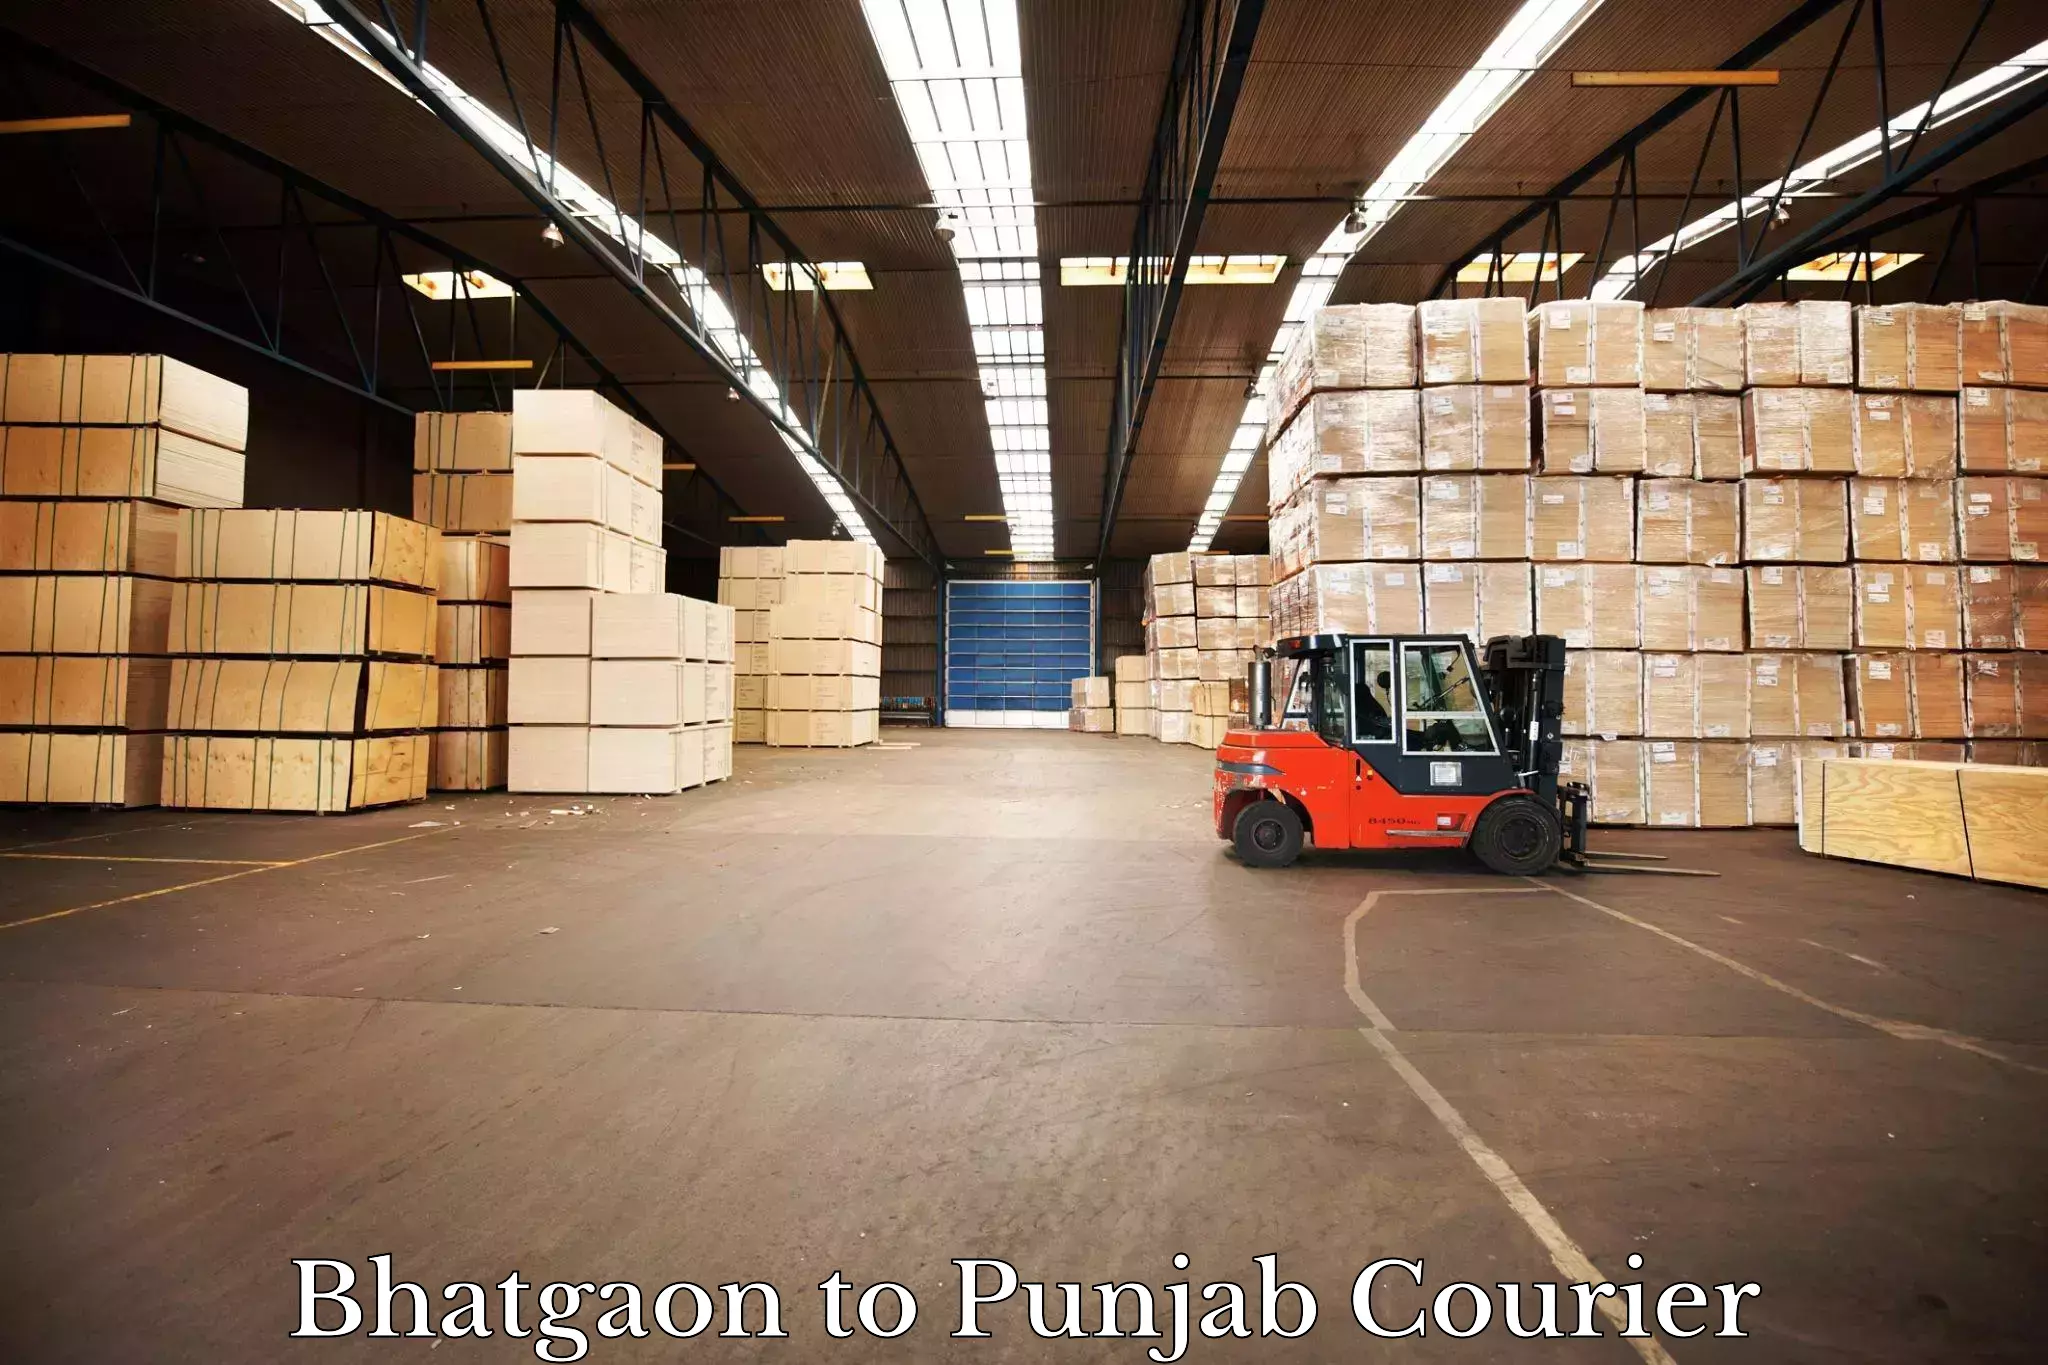 High-speed delivery Bhatgaon to Faridkot